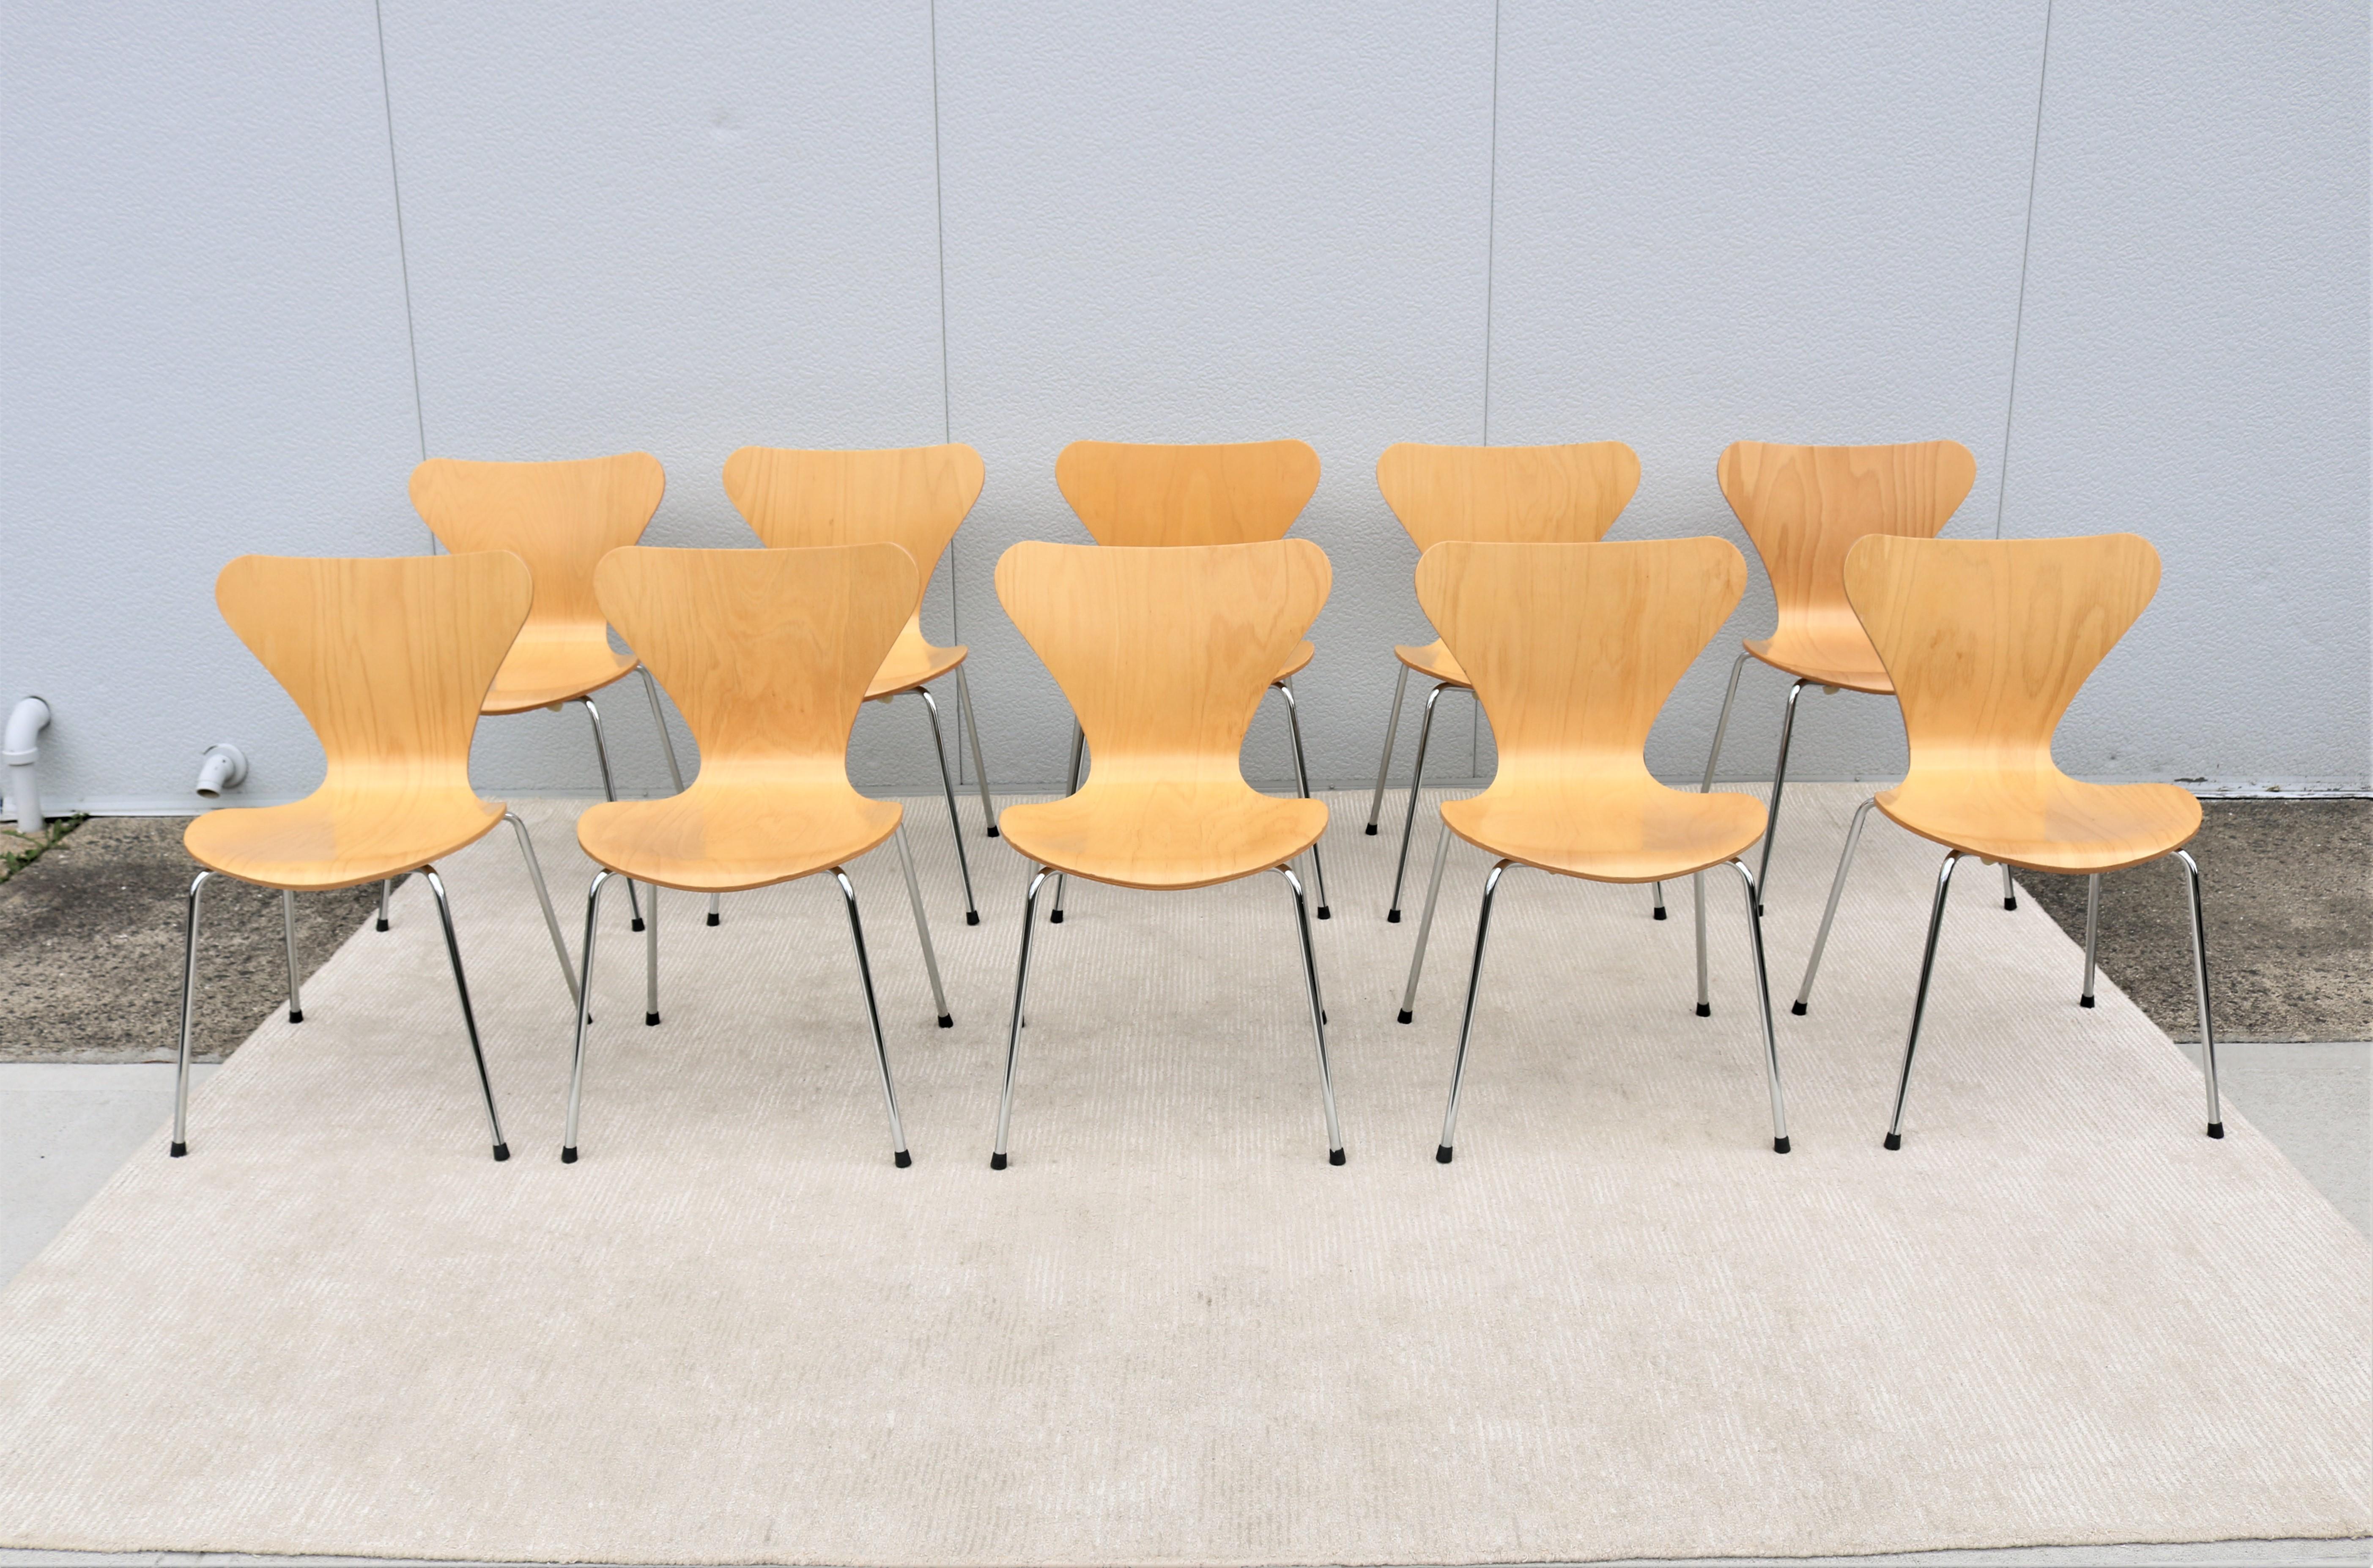 This elegant and versatile series 7 chairs was introduced in 1955 by the designer Arne Jacobsen and instantly became an iconic design.
Very comfortable bentwood seat looks absolutely wonderful in any period or style environment and among